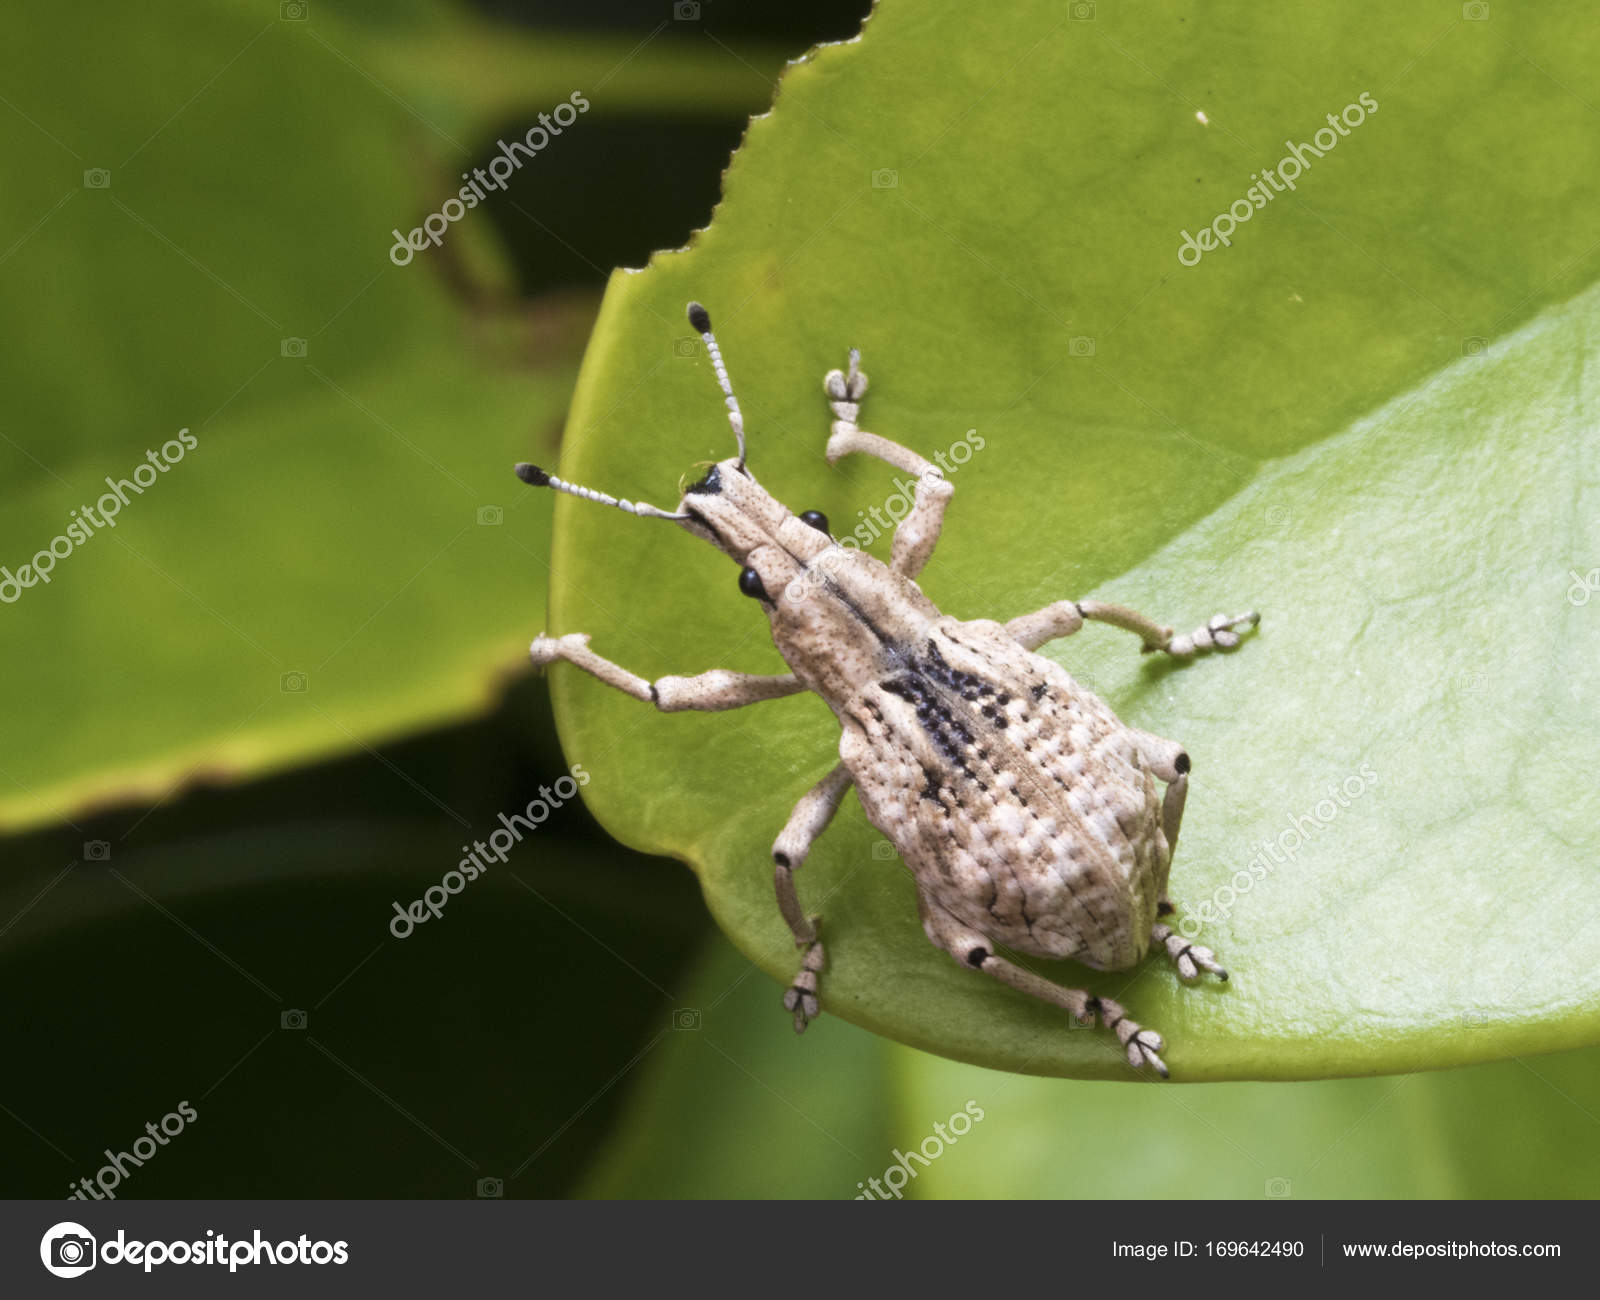 insect weevil,Curculionidae — Stock Photo © photoncatcher63 #169642490